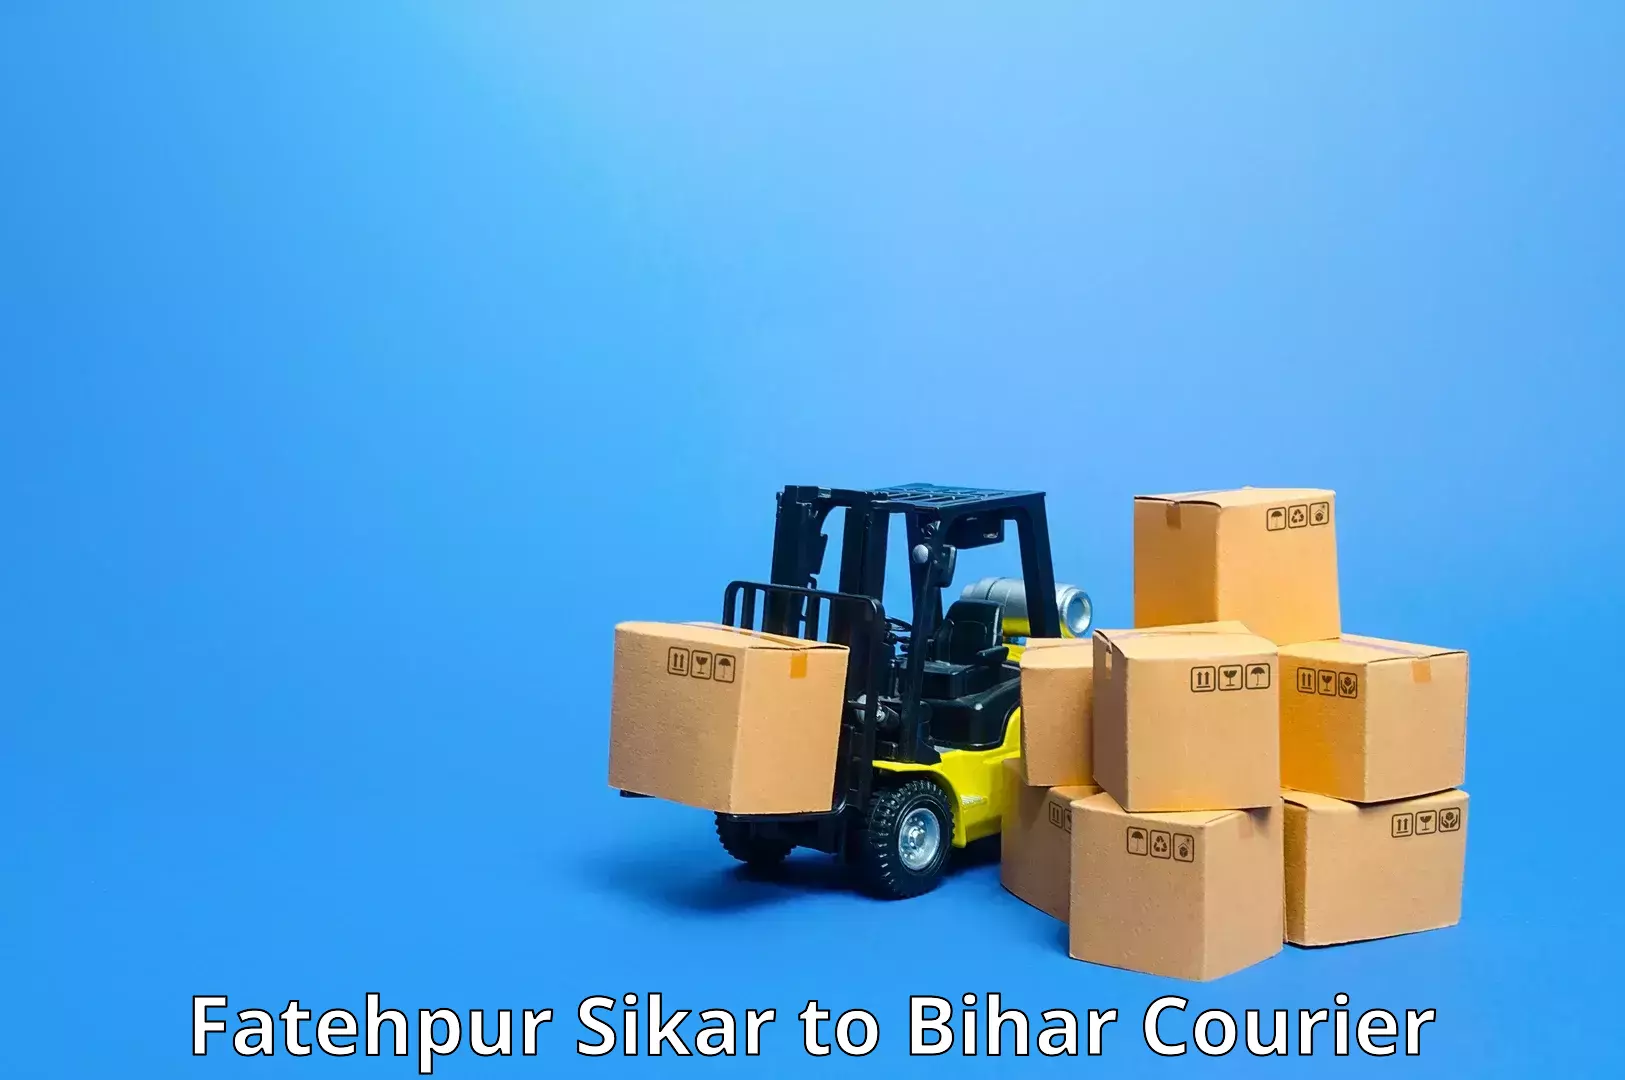 Efficient package consolidation Fatehpur Sikar to Bihar